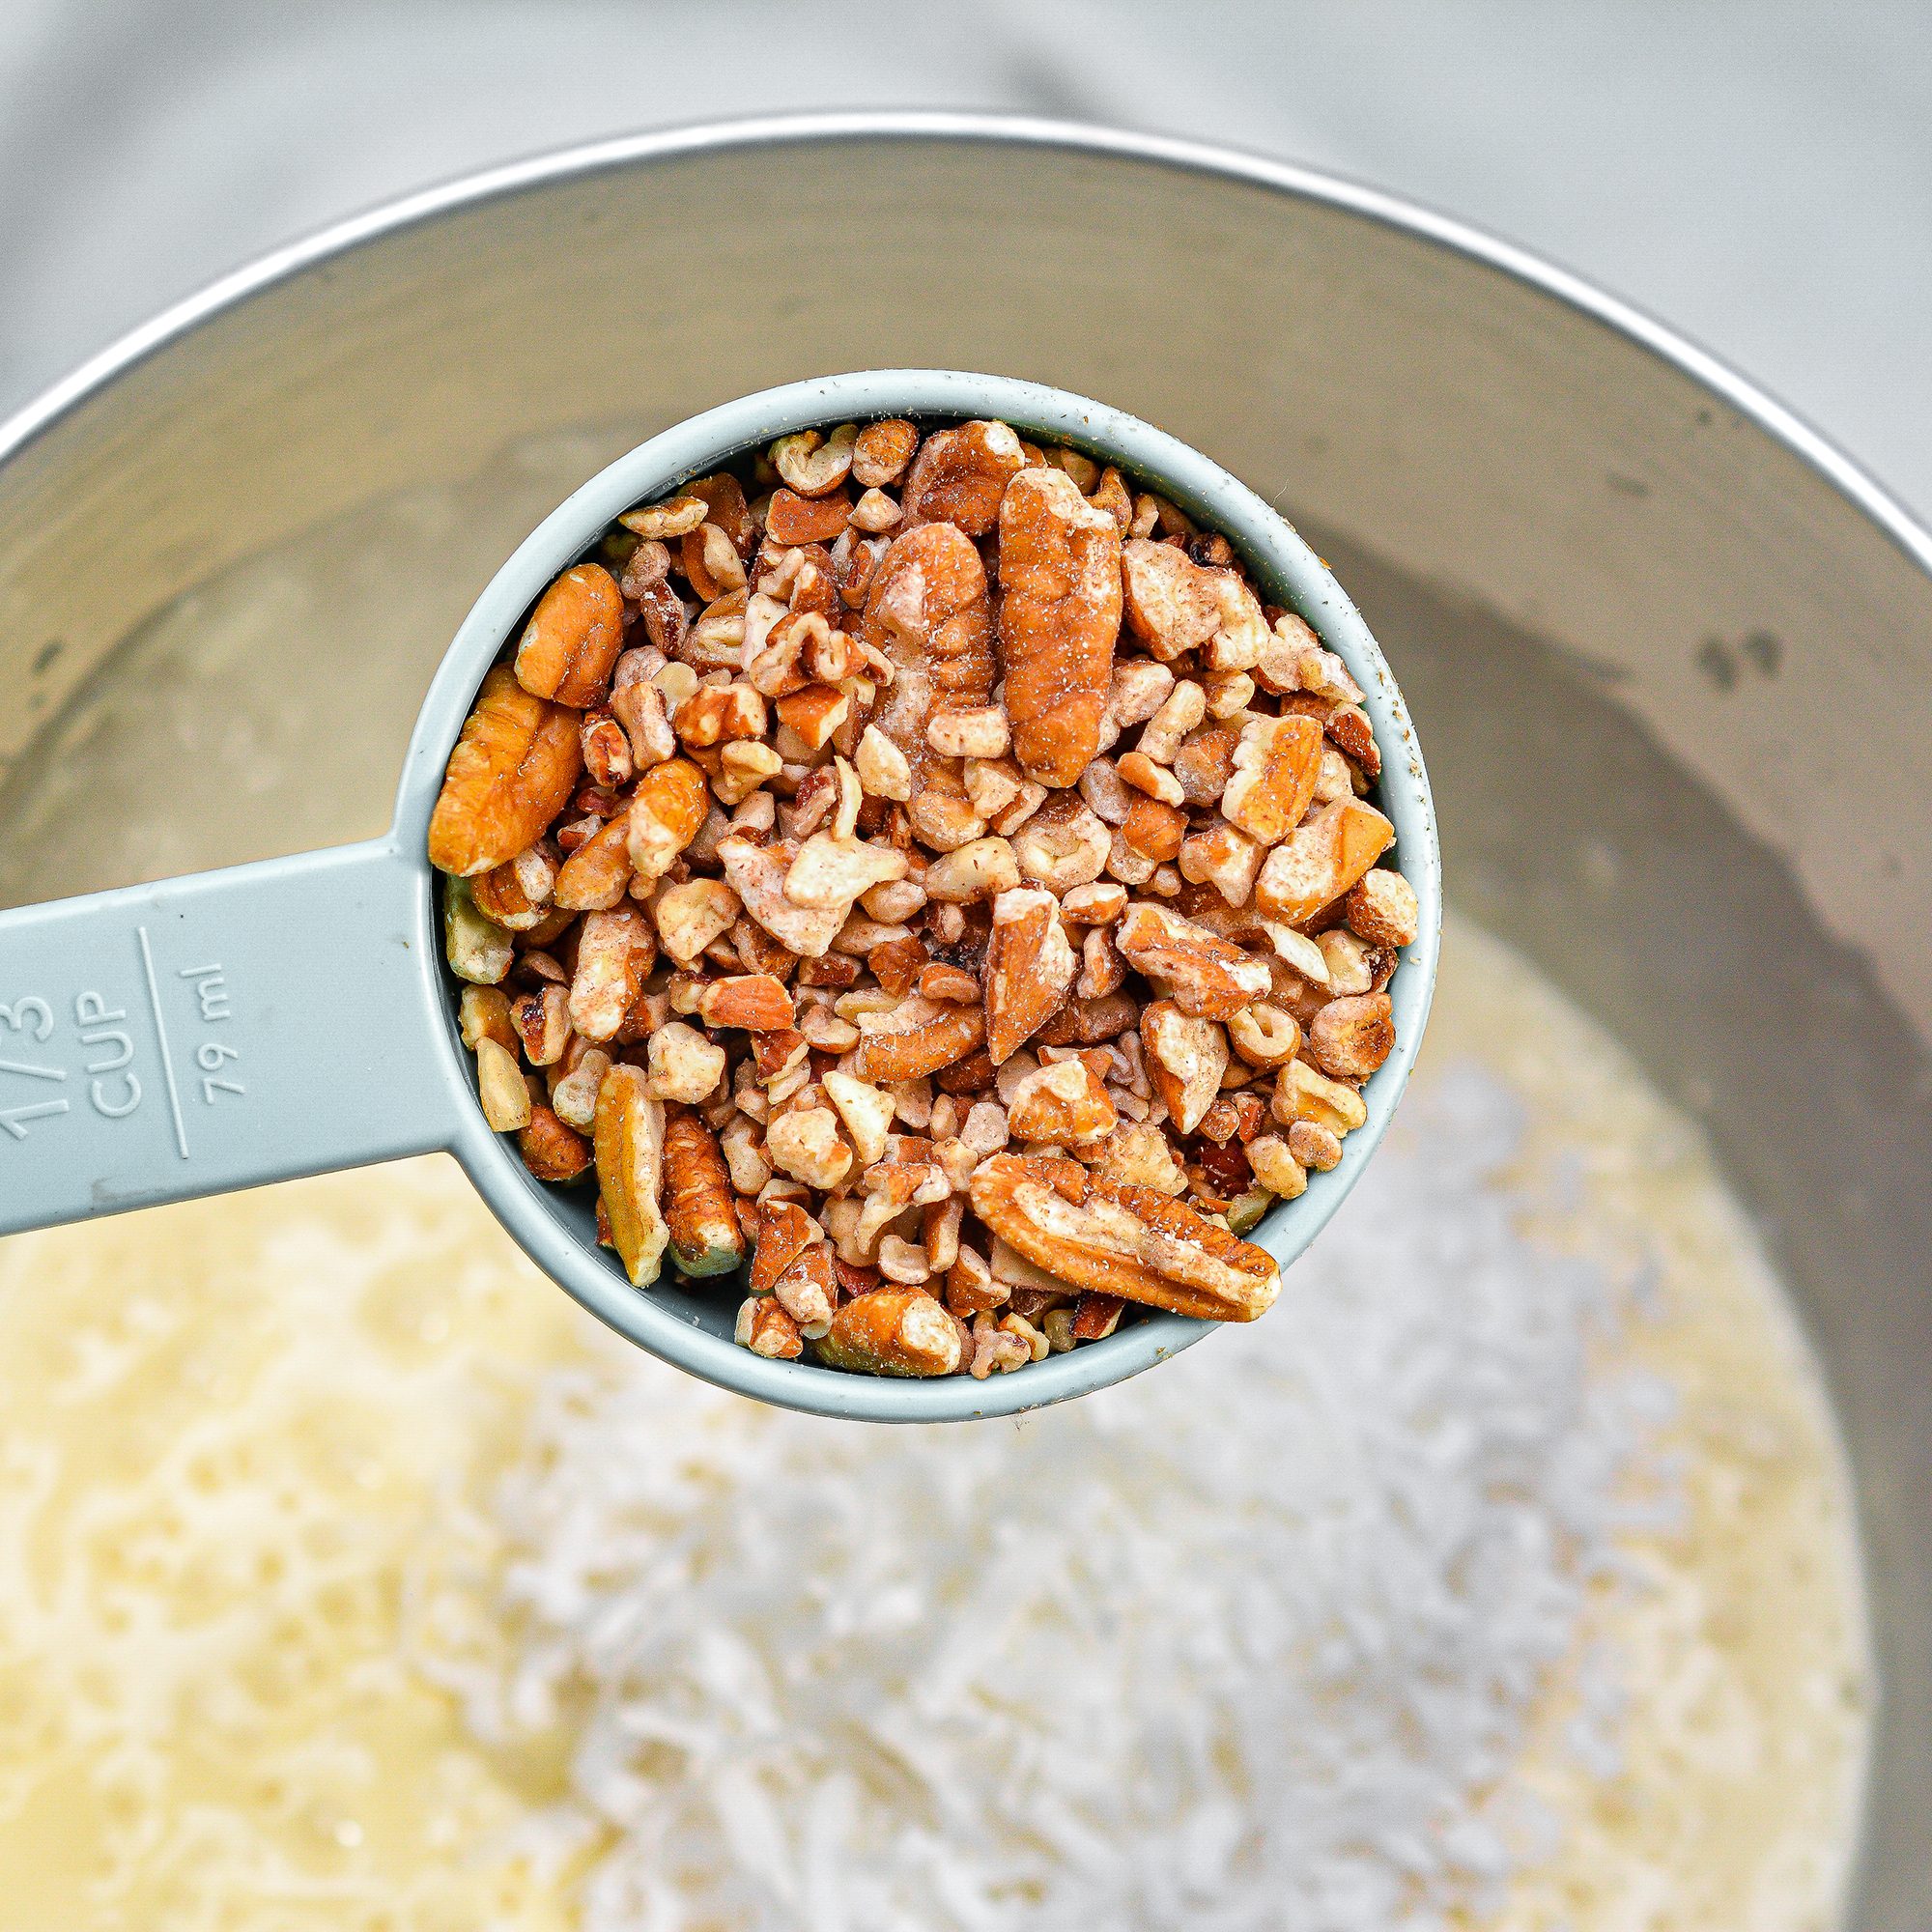  Fold the pecans and shredded coconut into the batter.